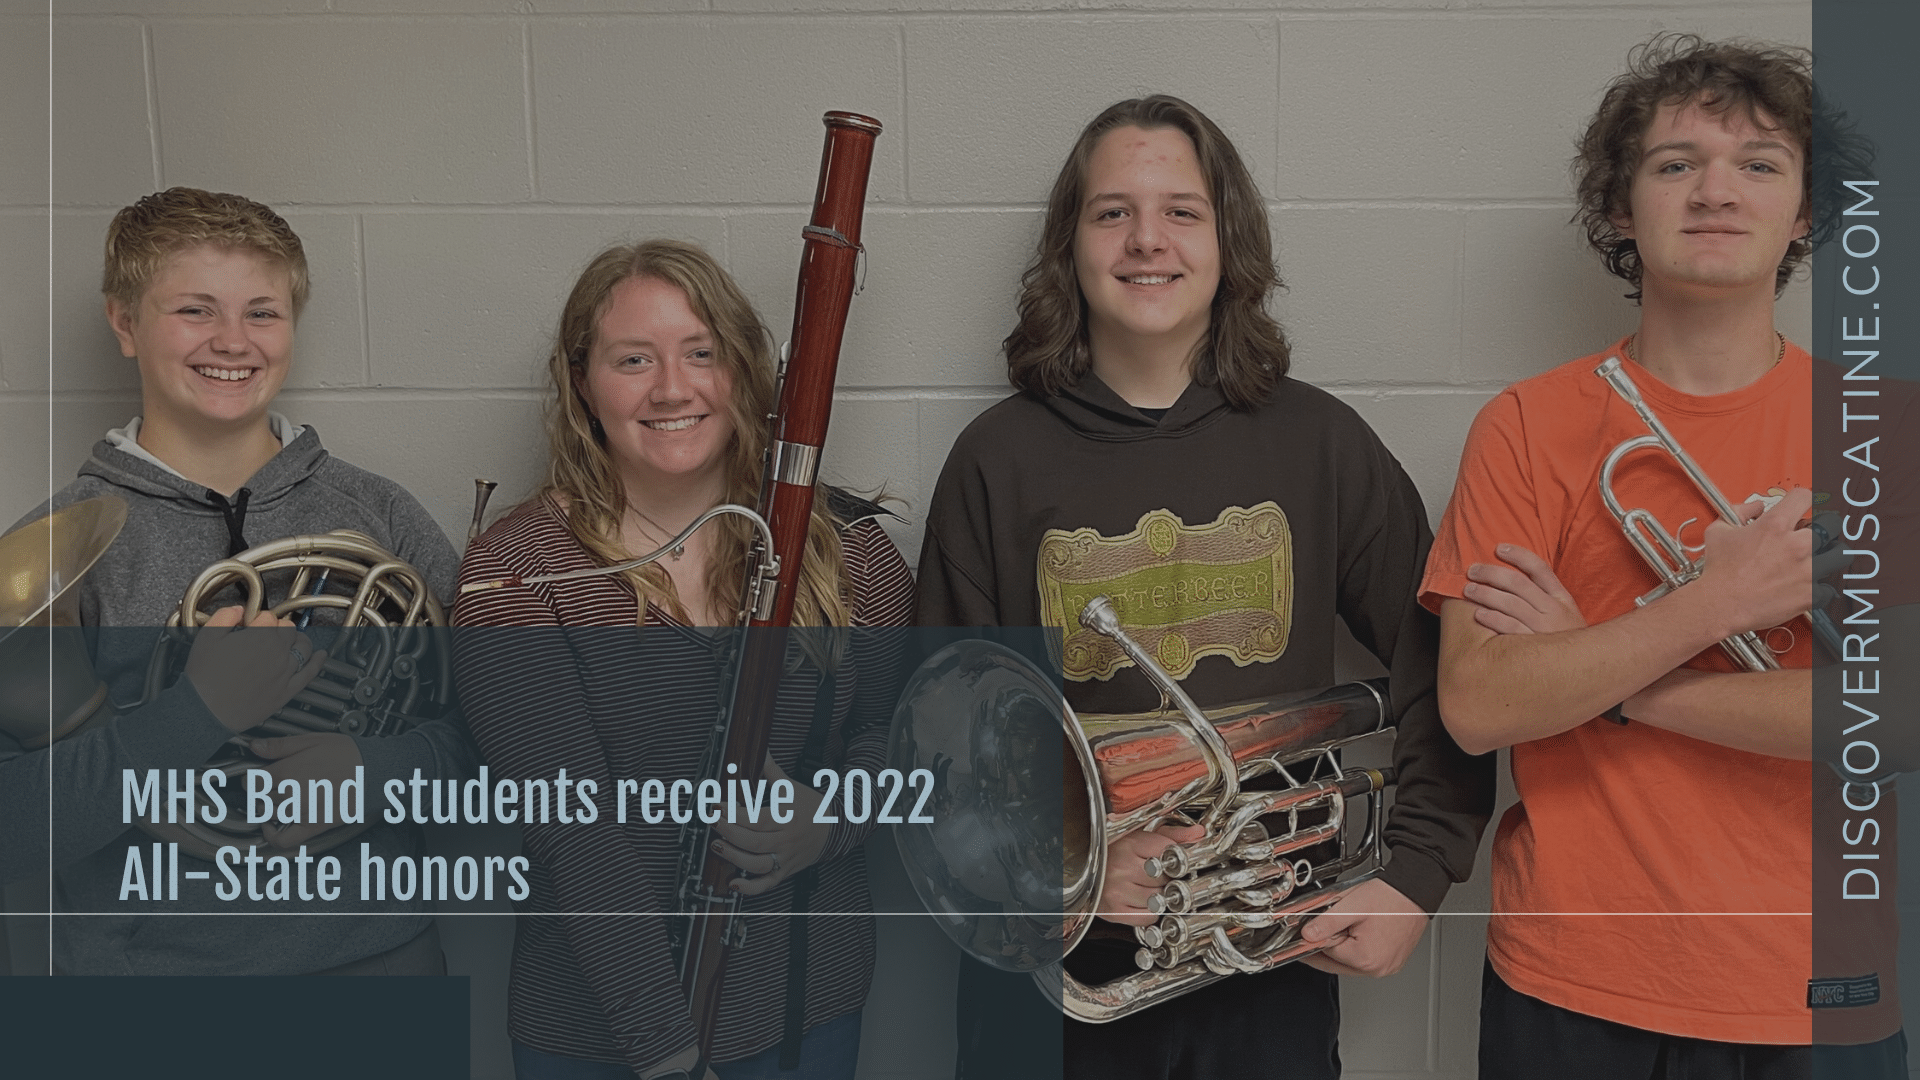 MHS Band students receive 2022 All-State honors